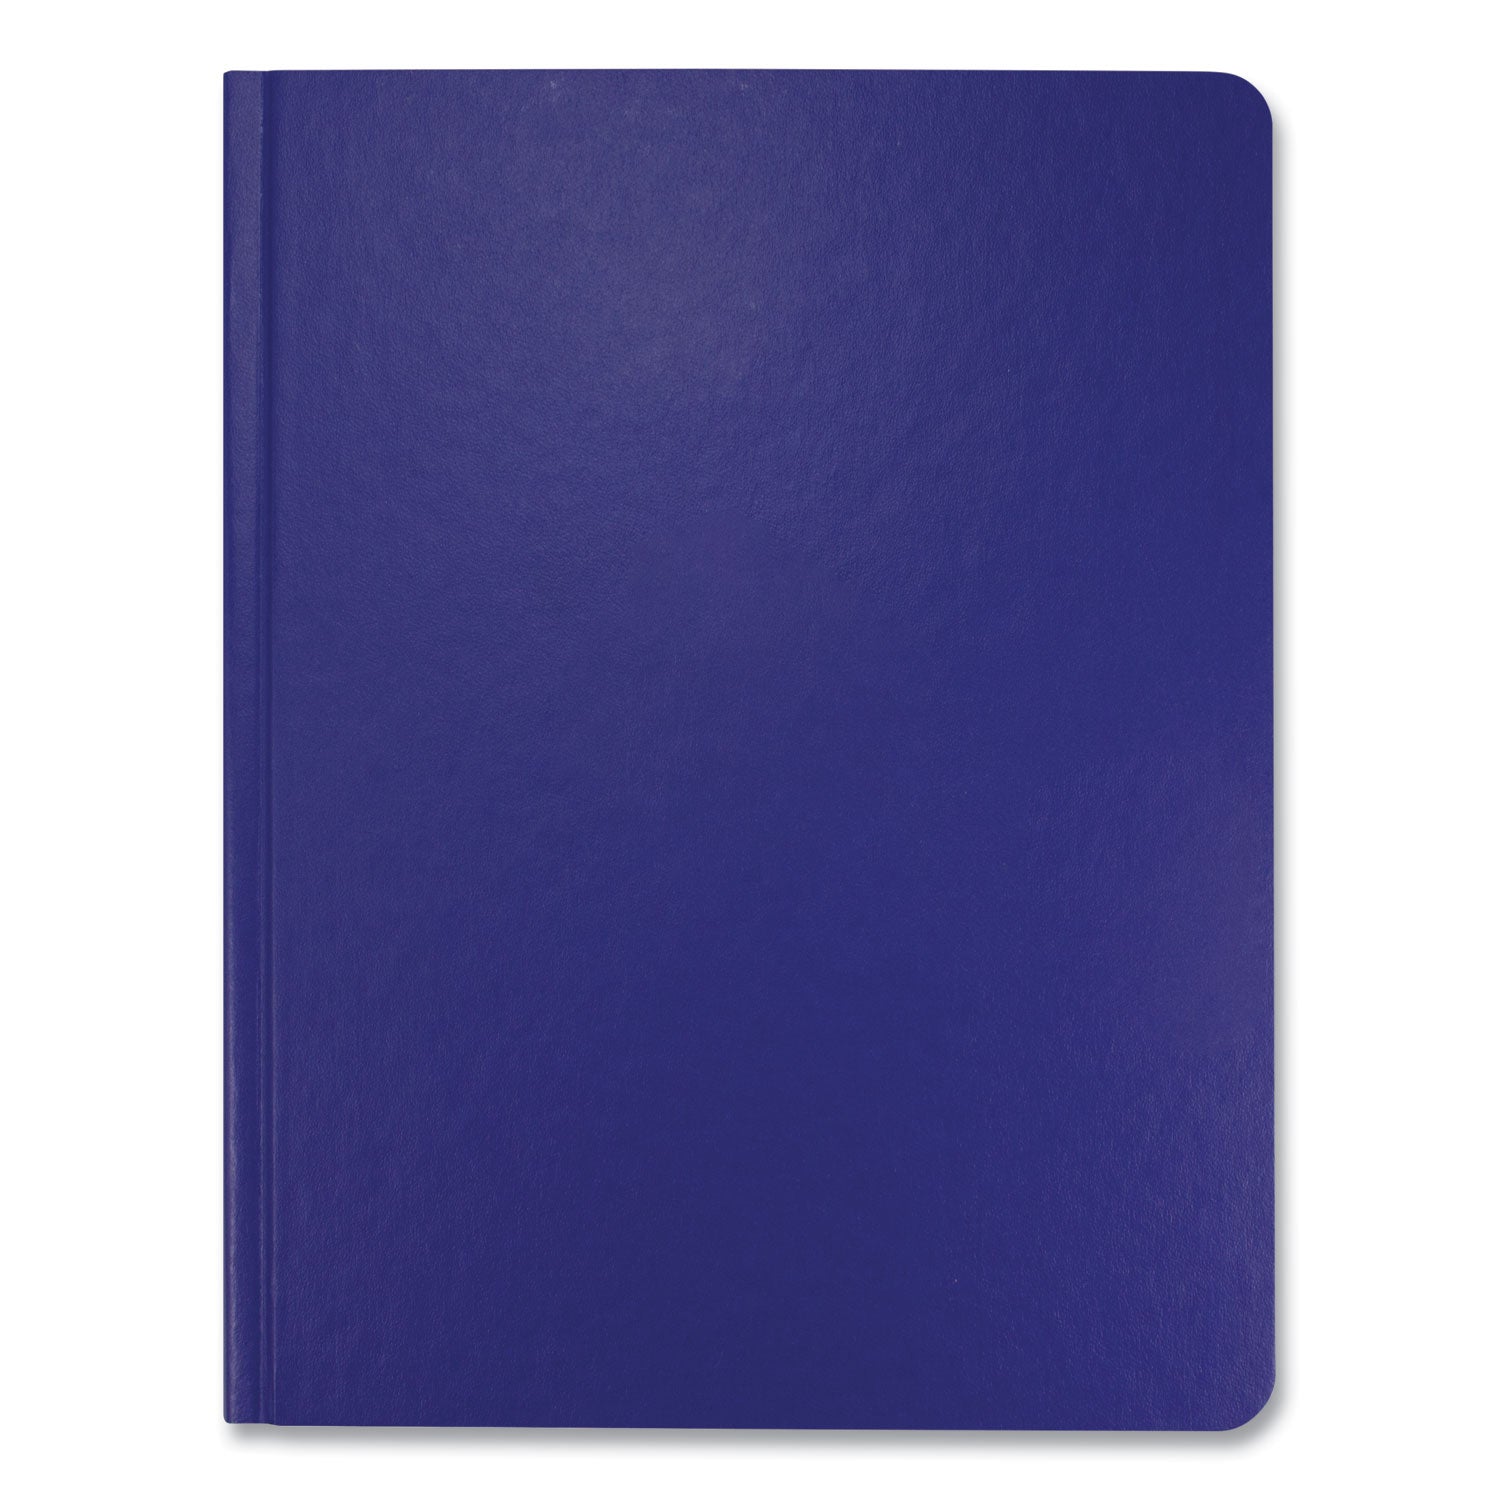 Chemistry Notebook, Narrow Rule, Blue Cover, (60) 9.25 x 7.5 Sheets - 